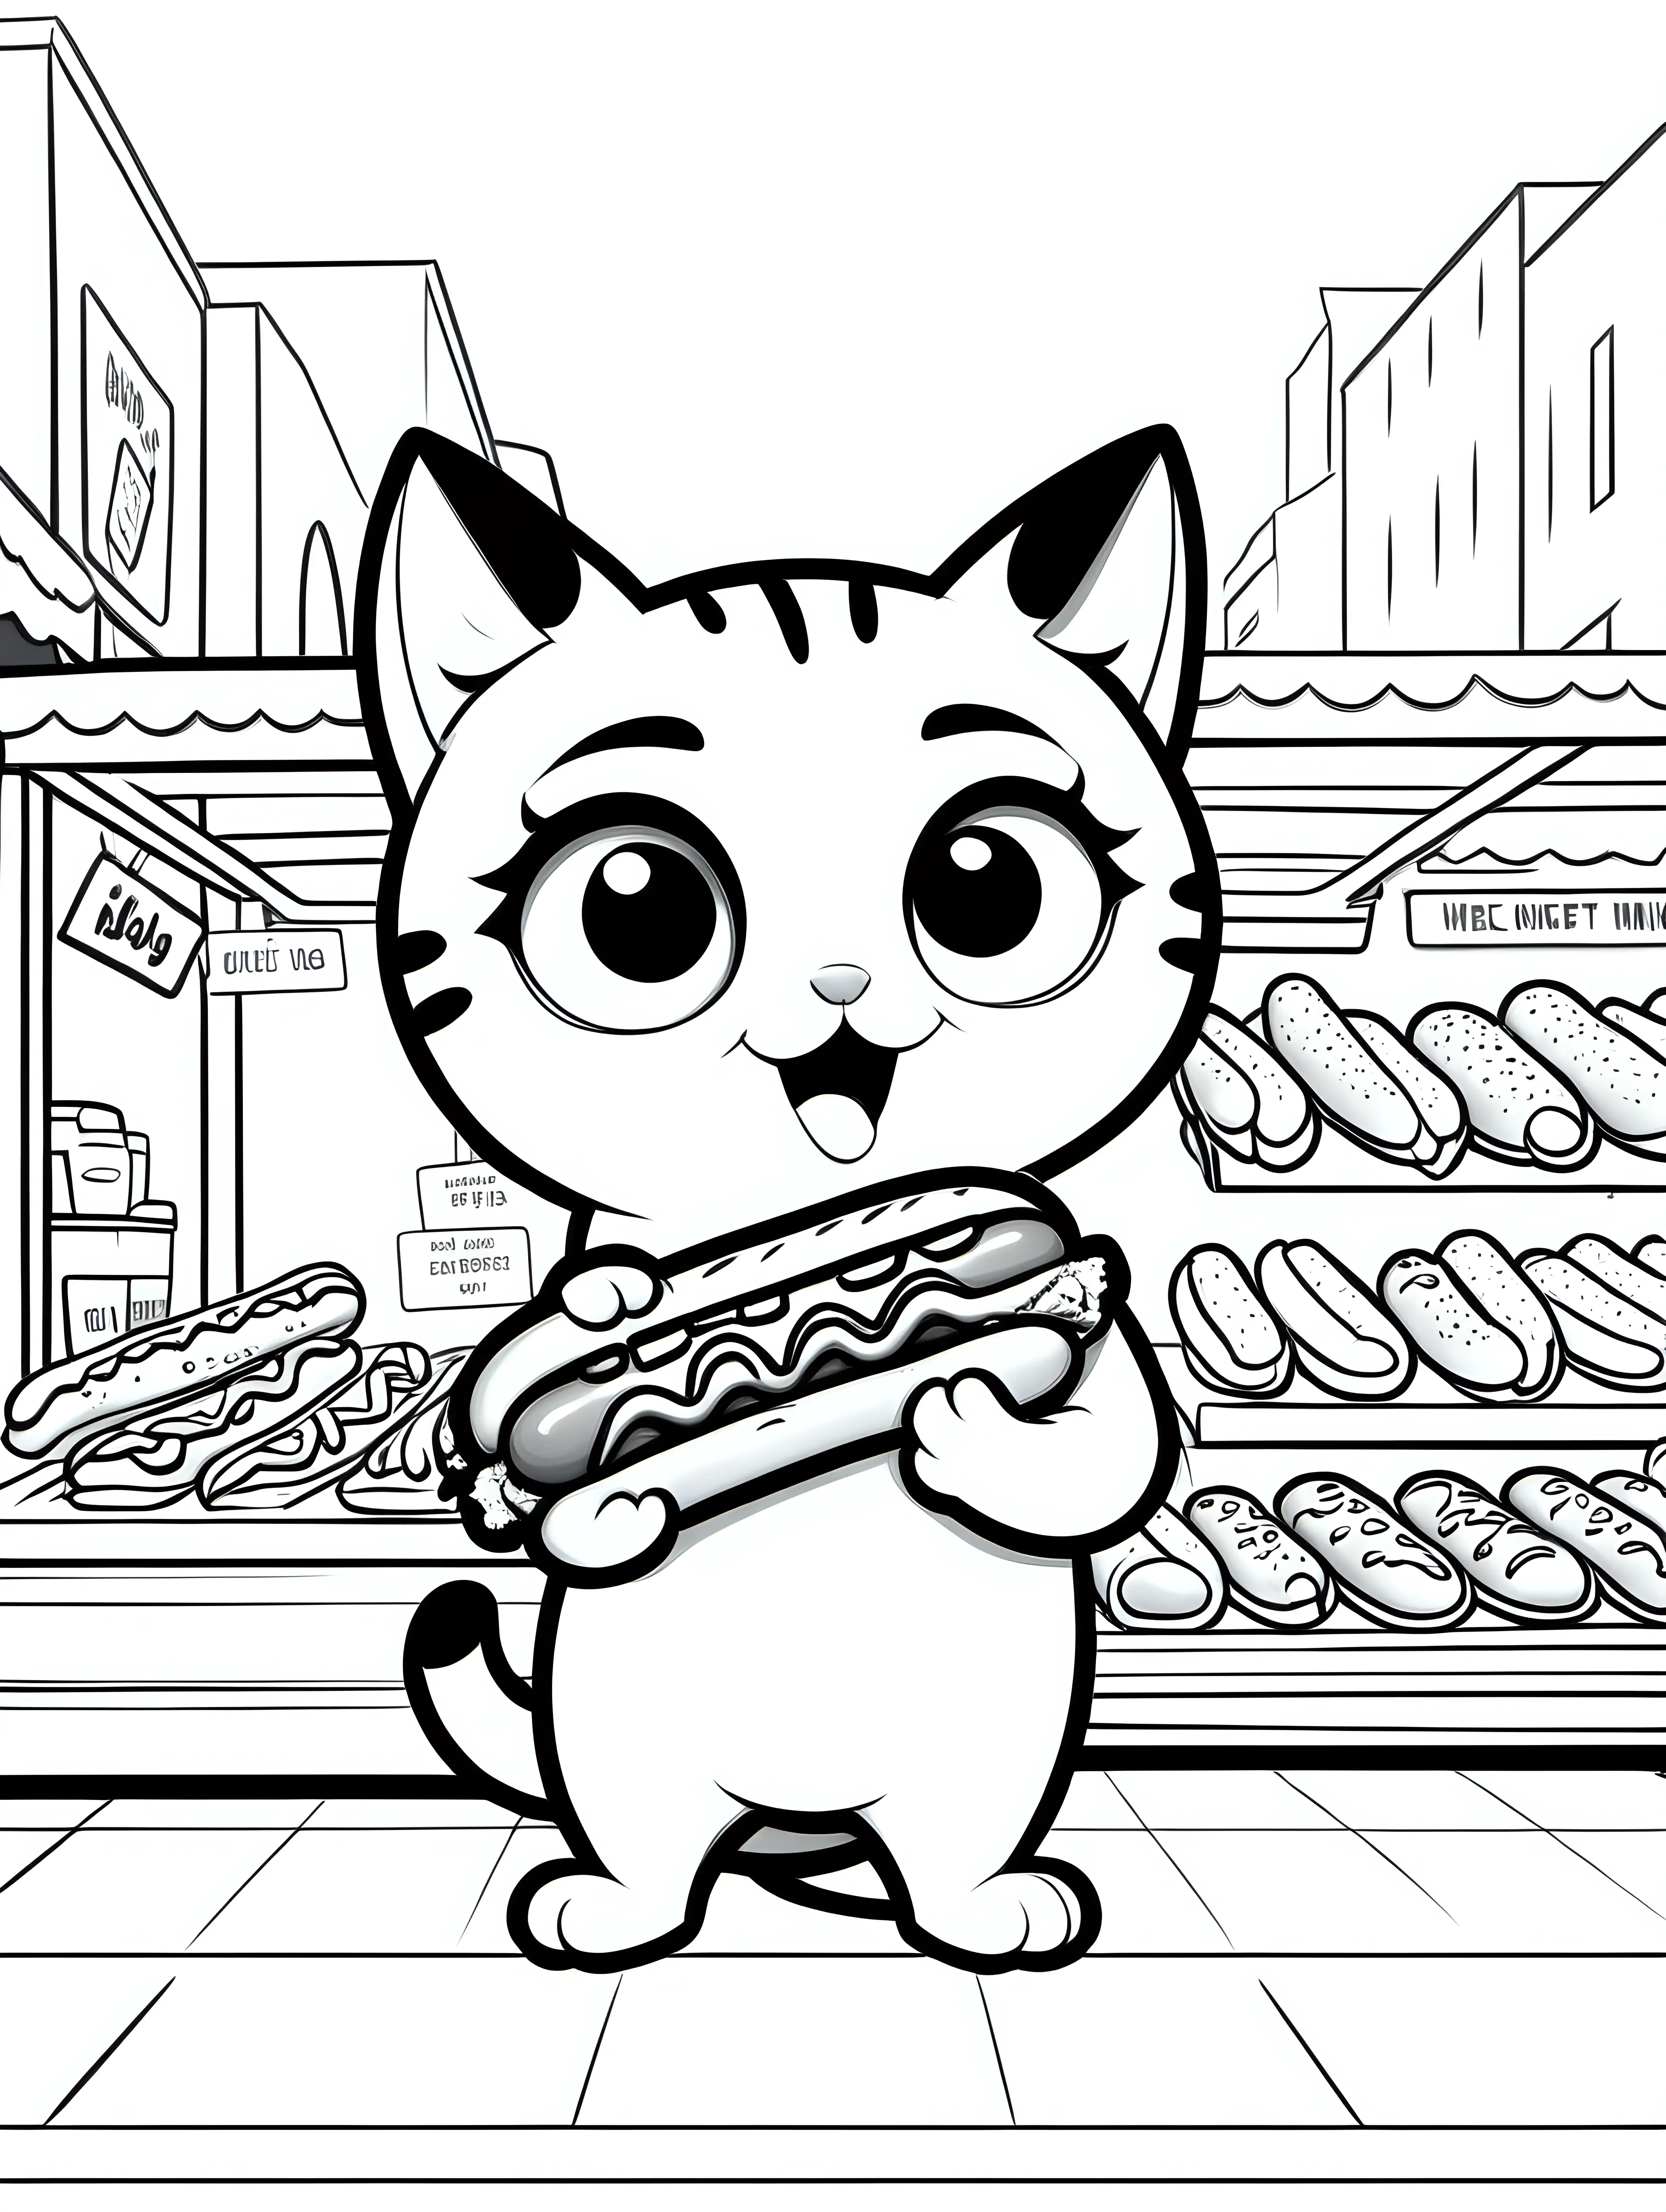 cute cat, eating a hot dog,  at the market, big cute eyes, pixar style, simple outline and shapes, coloring page black and white comic book flat vector, white background